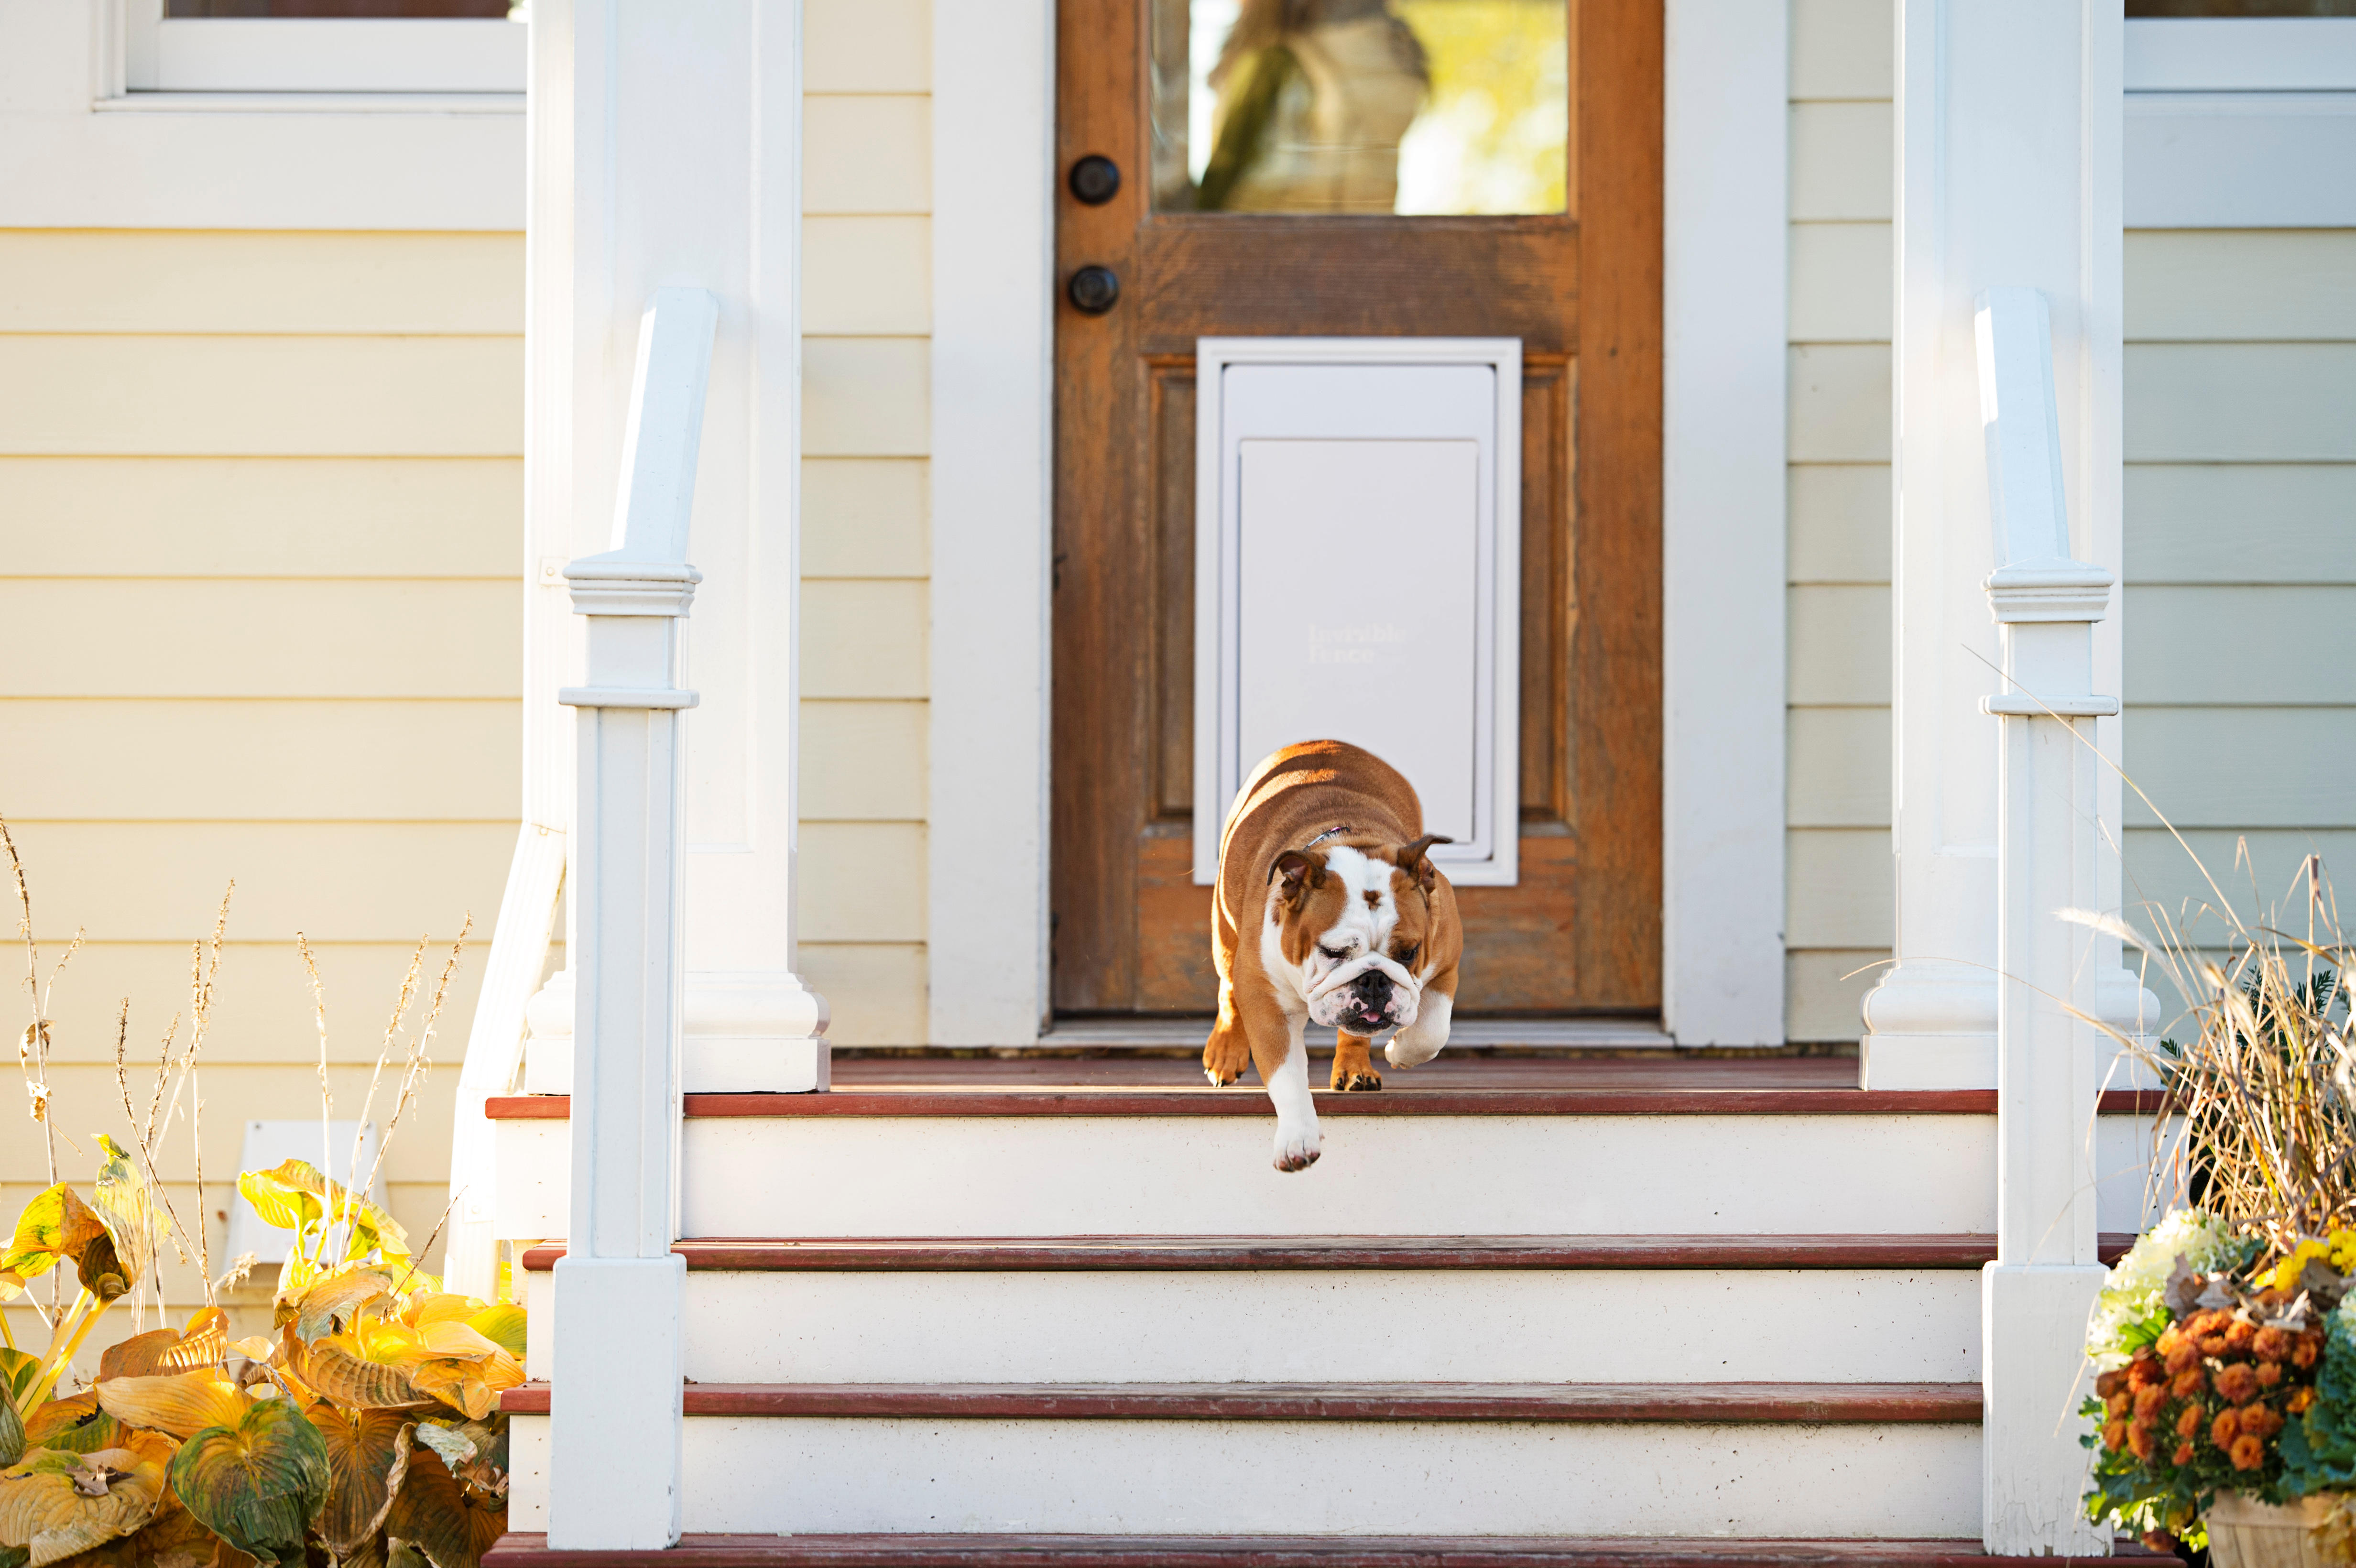 A dog using an electronic pet door to exit the home.